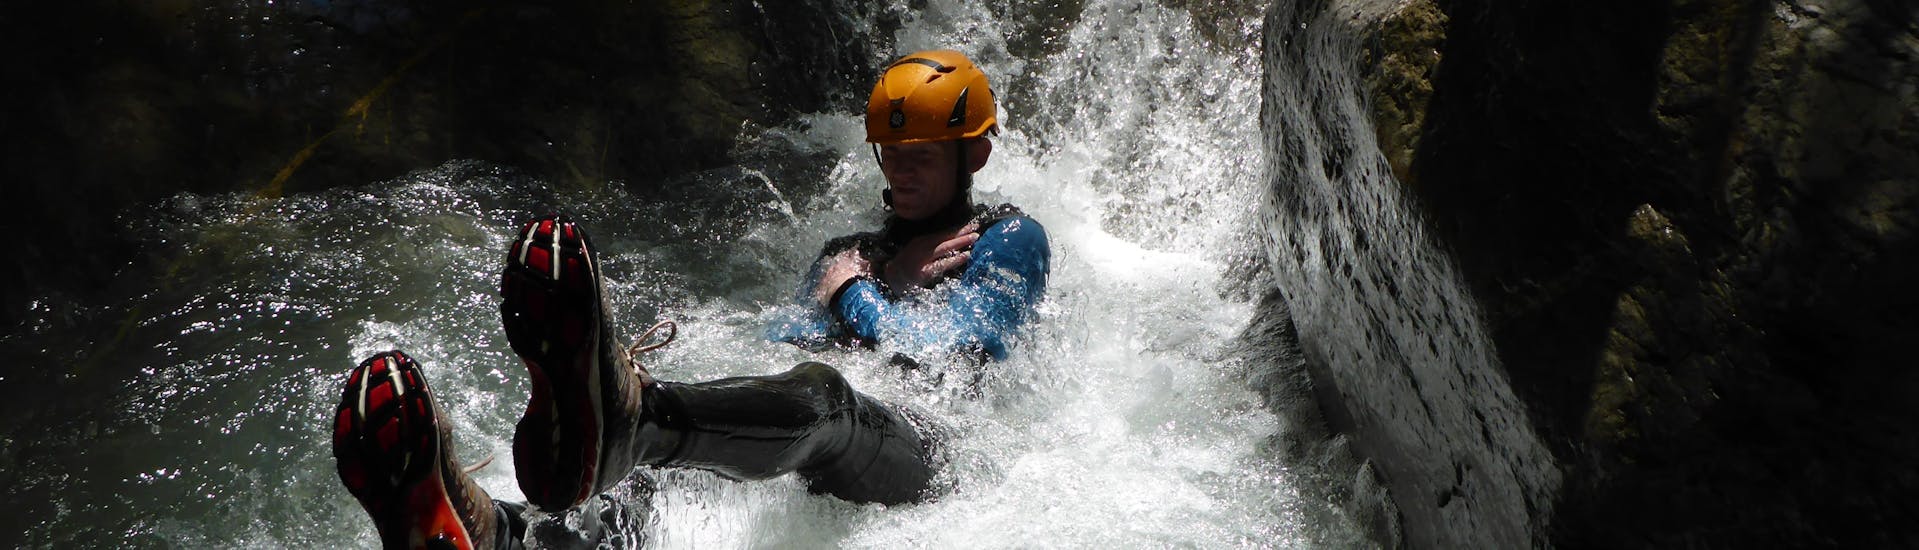 Family Canyoning Stuibenfälle in Reutte - Safe beginner tour level 1.